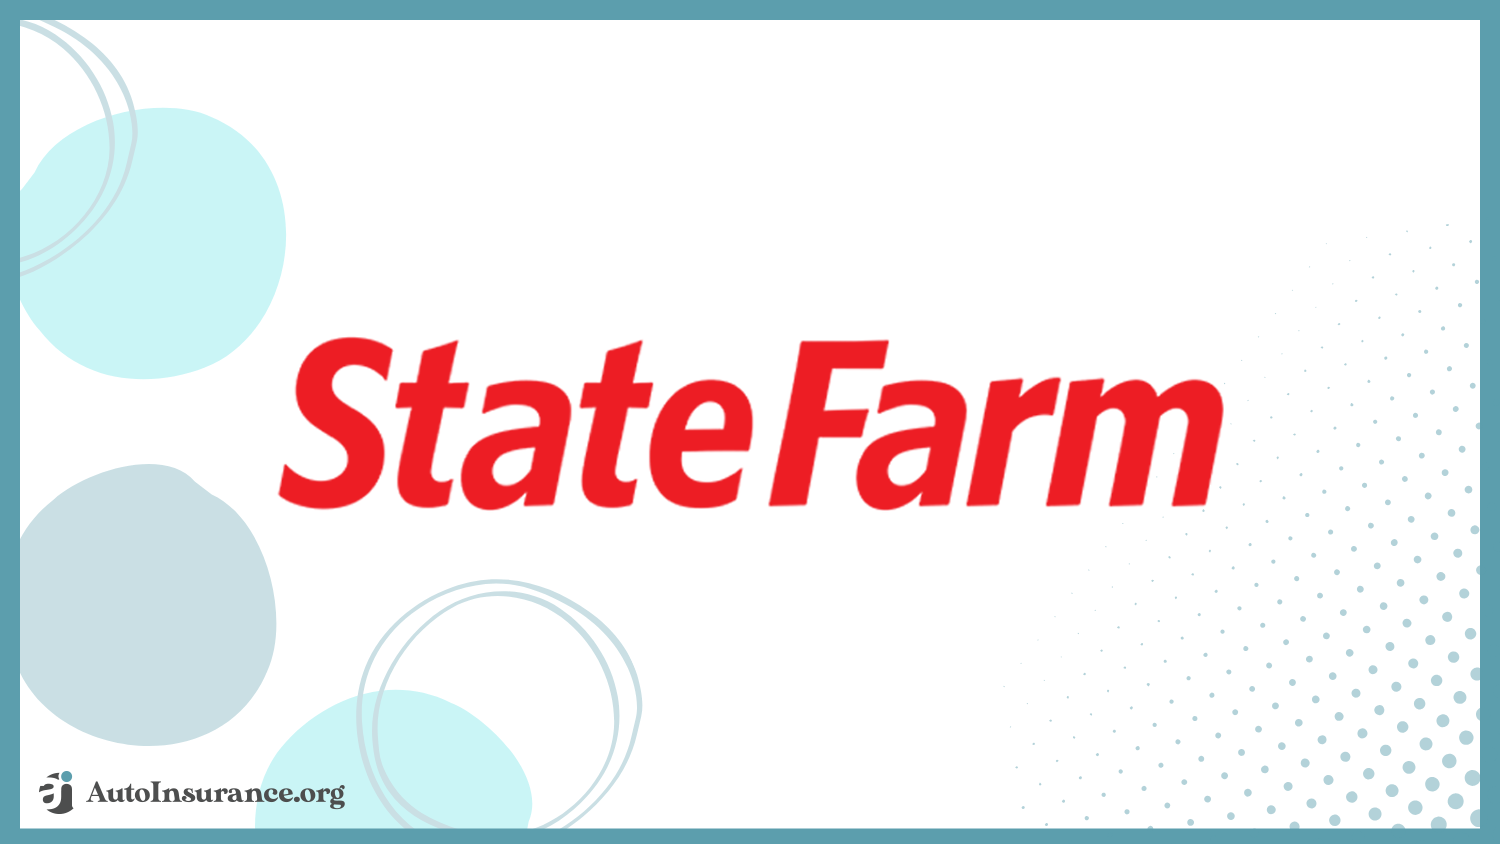 State Farm: Best Auto Insurance for Disabled Veterans